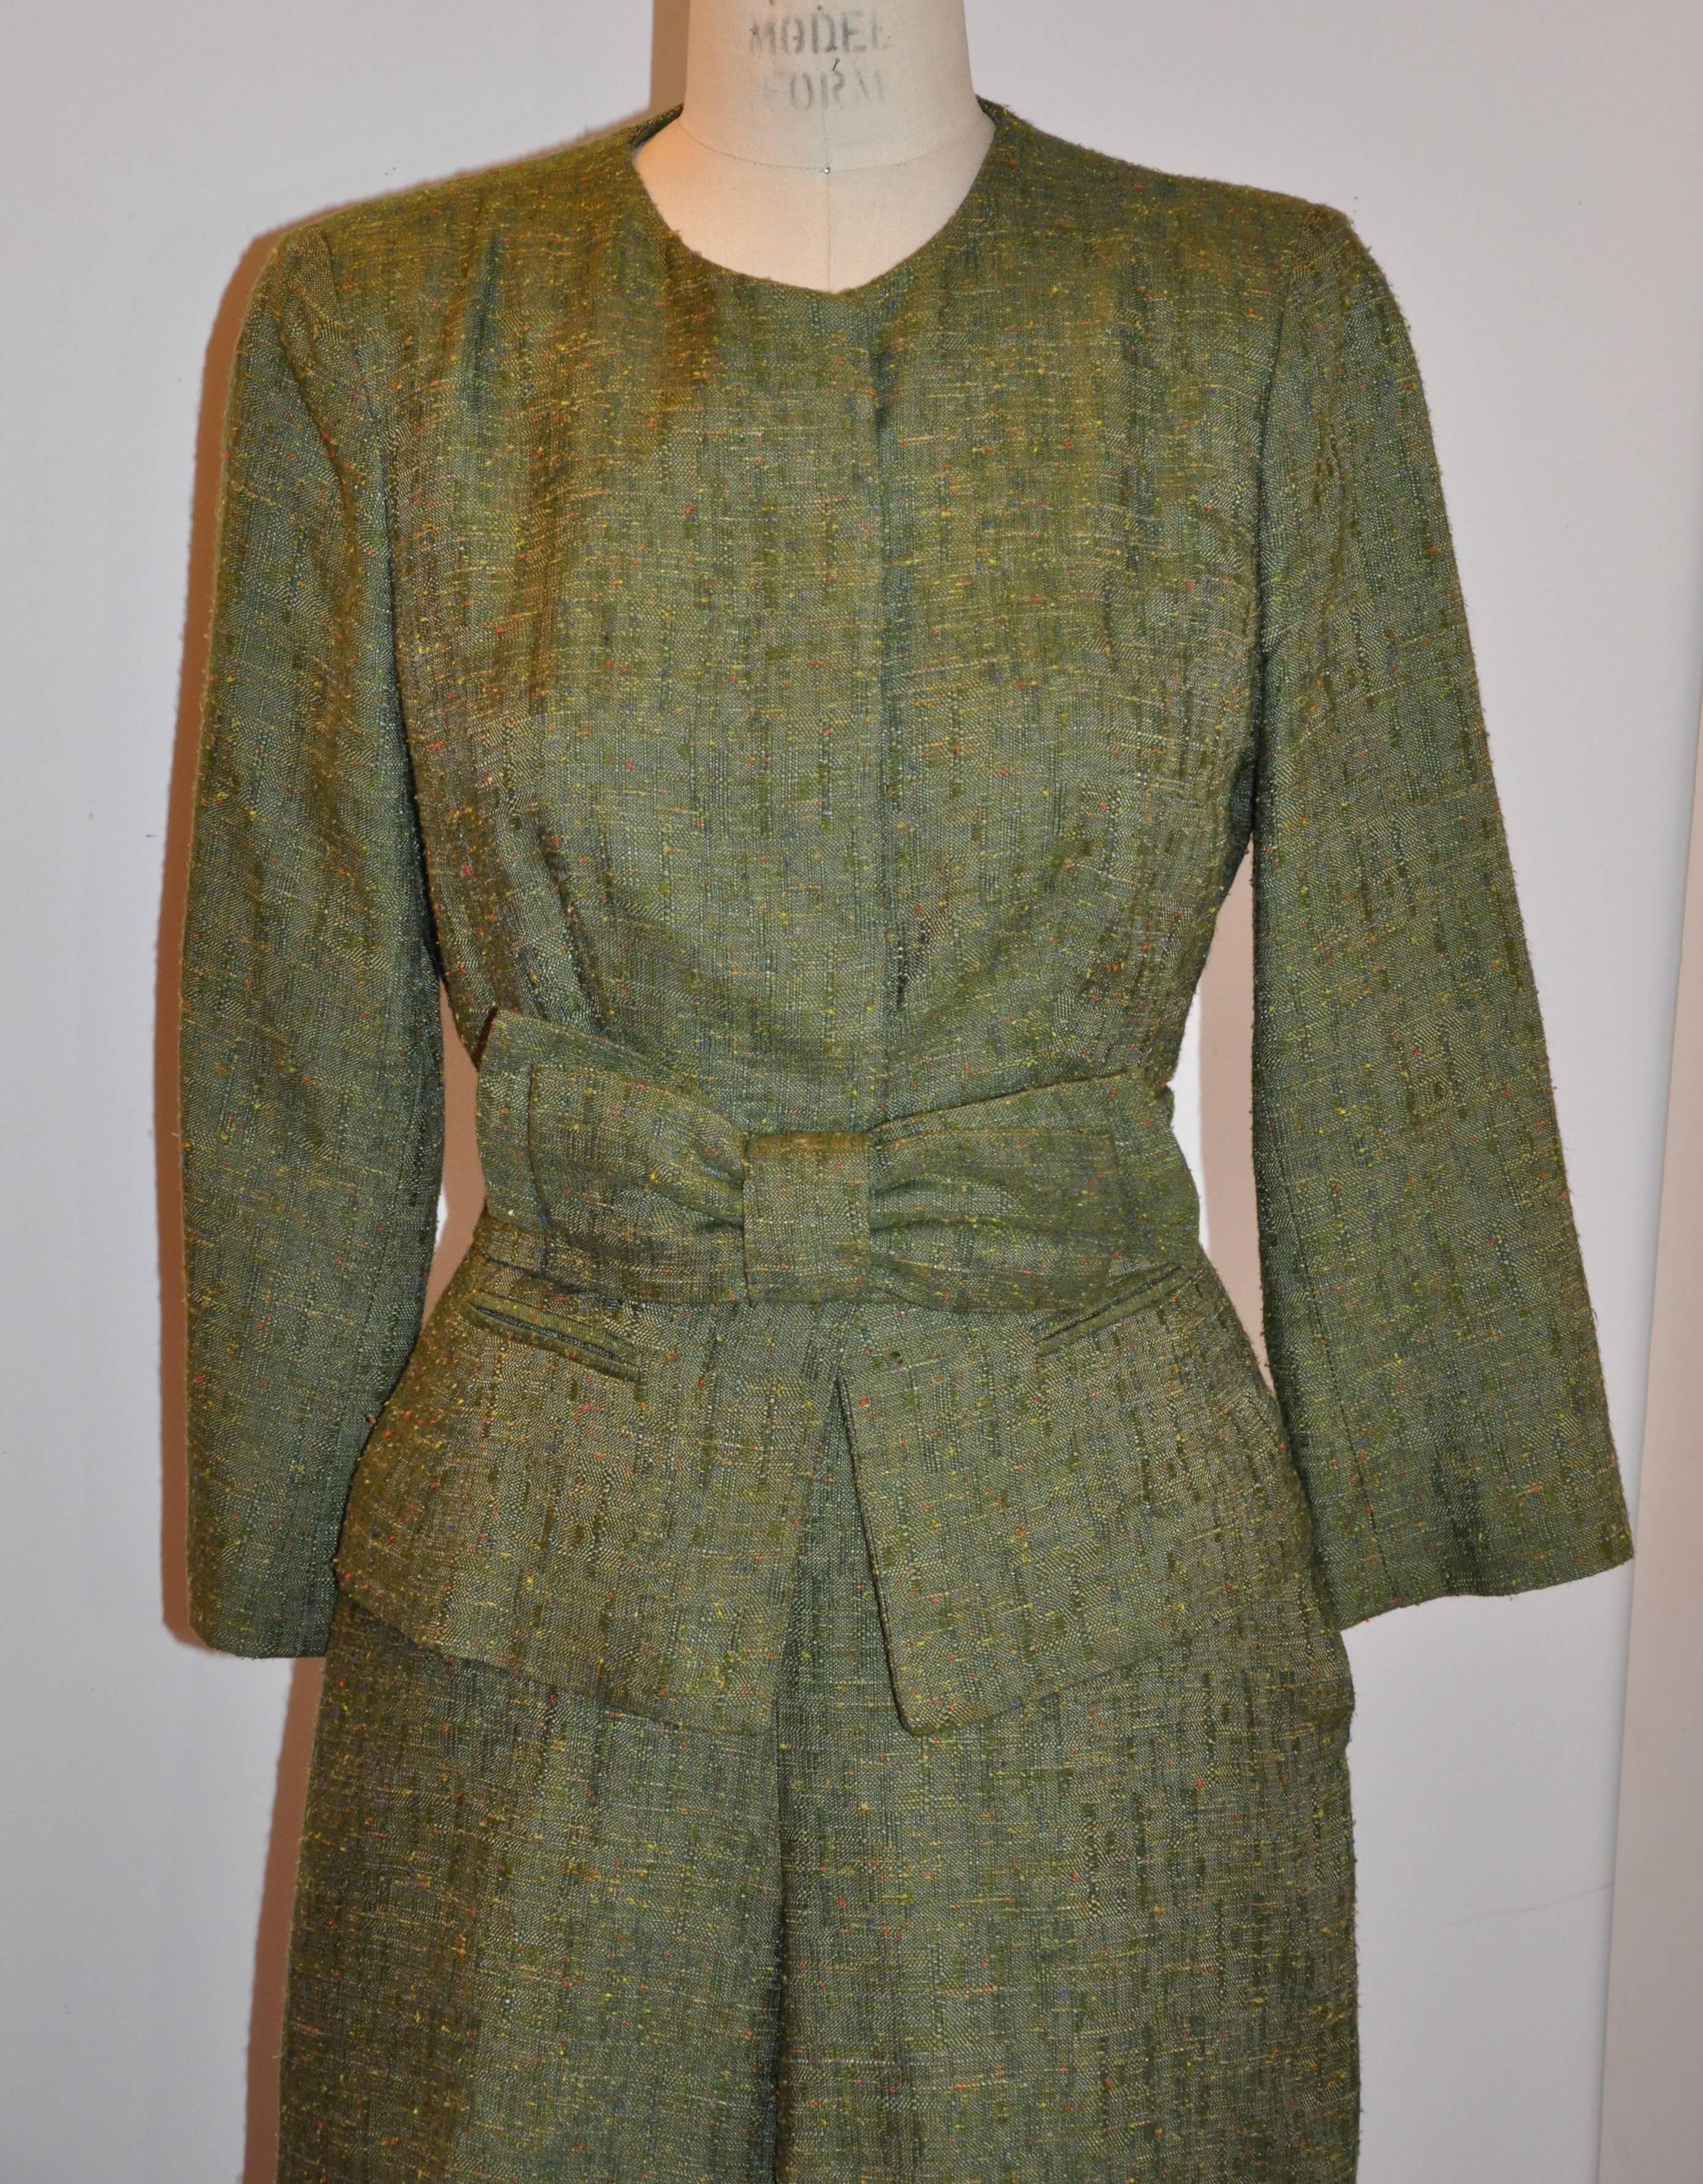 Oscar de la Renta wonderfully detailed olive-green three-piece blend of silk and linen consists of a jacket with hidden buttons, slim-cut trousers and a "Bow" belt which is optional in completely this ensemble. Jacket's interior is